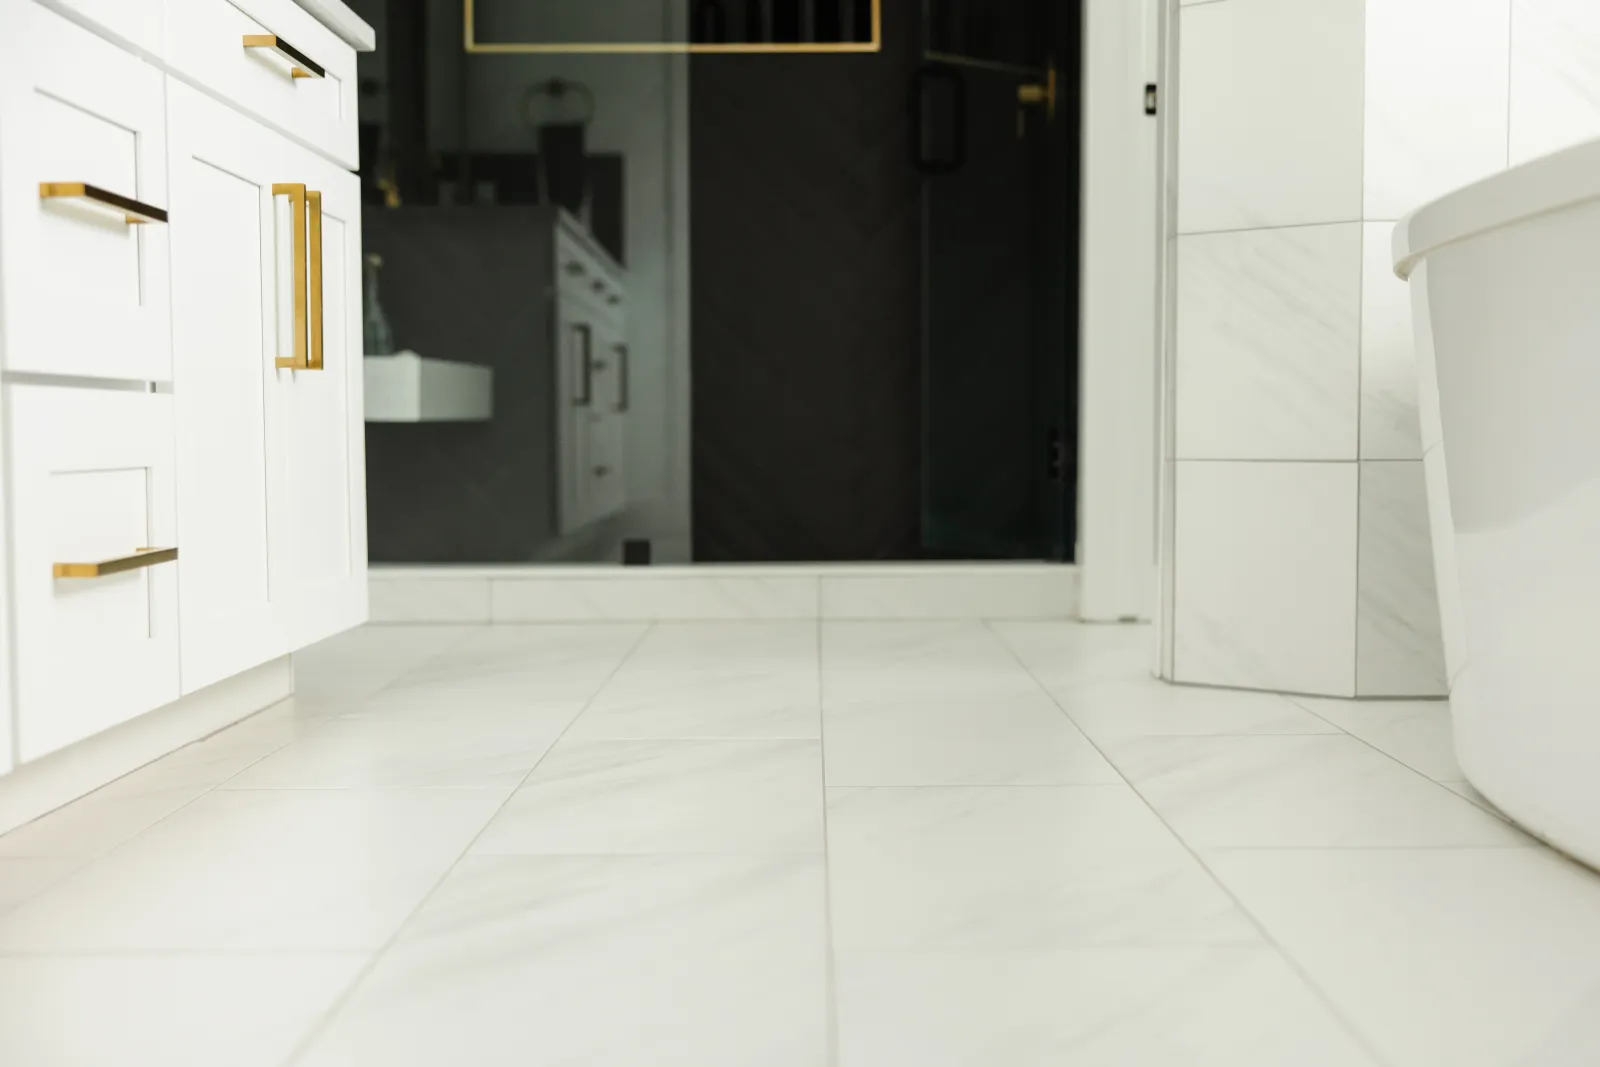 white bathroom tiles on floor and walls with white cabinets with gold handles and a dark black tiled shower behind glass